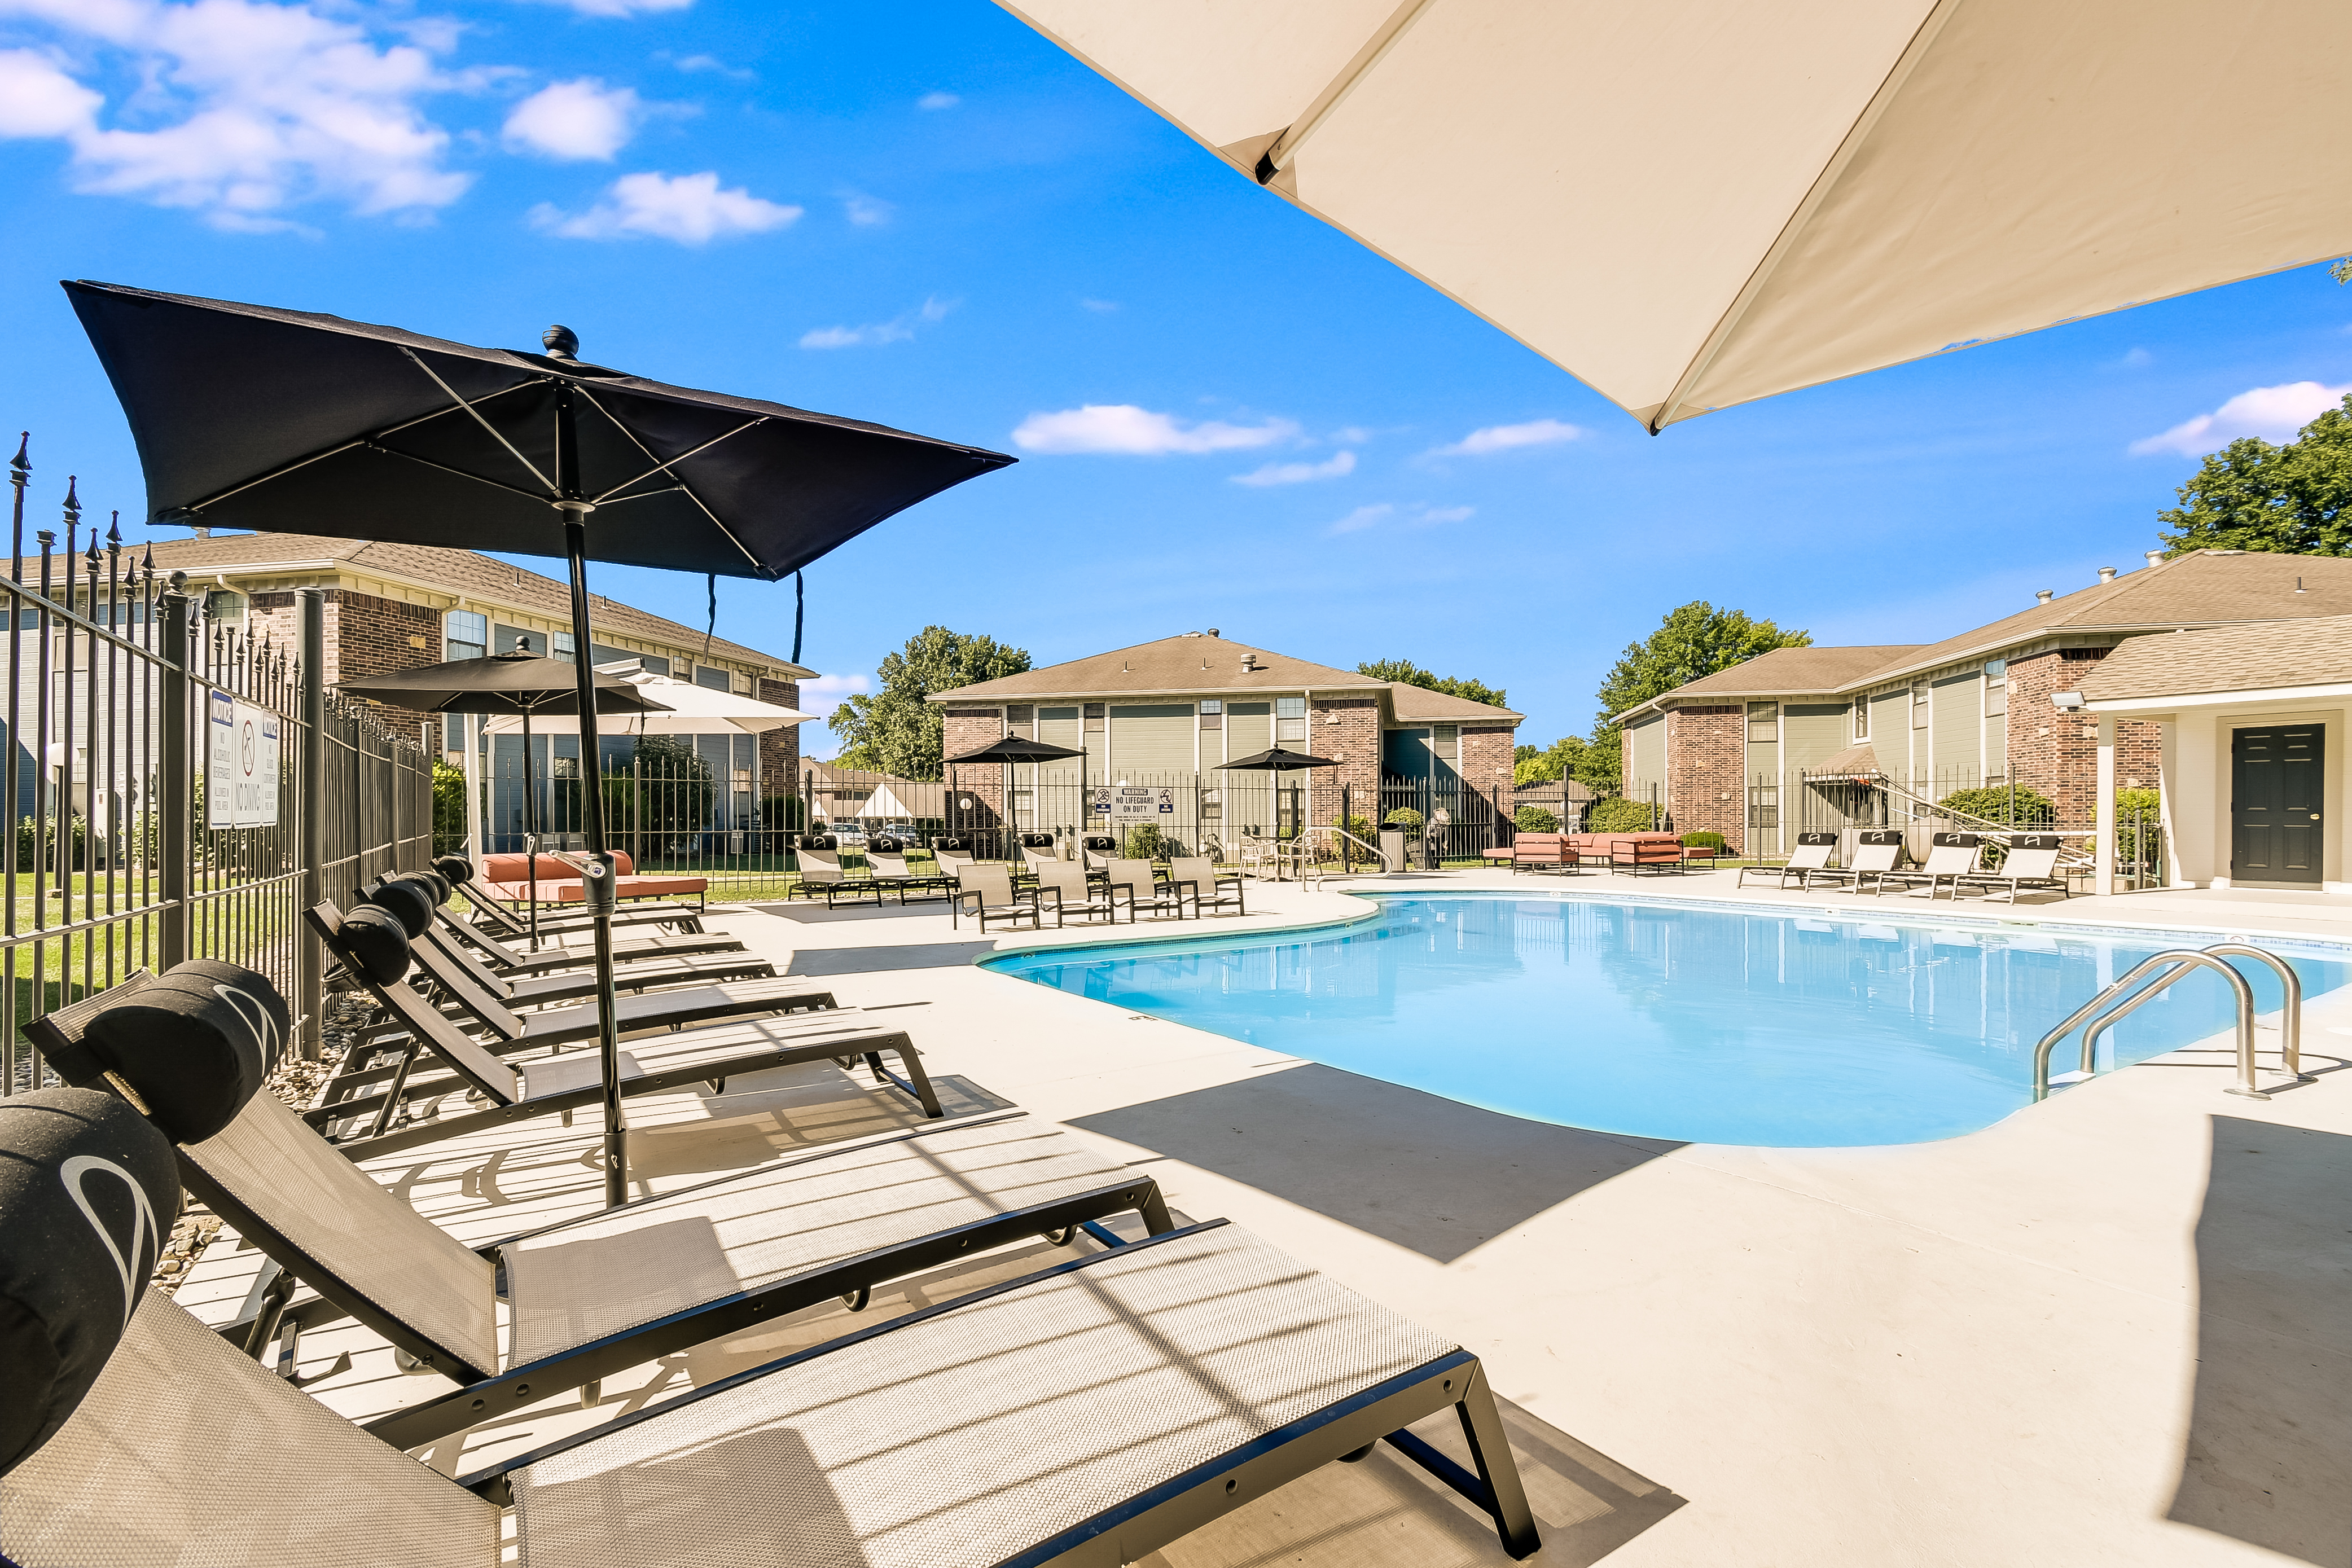 Tanning chairs and umbrellas in poolside lounge area at The Arbor in Blue Springs, Missouri